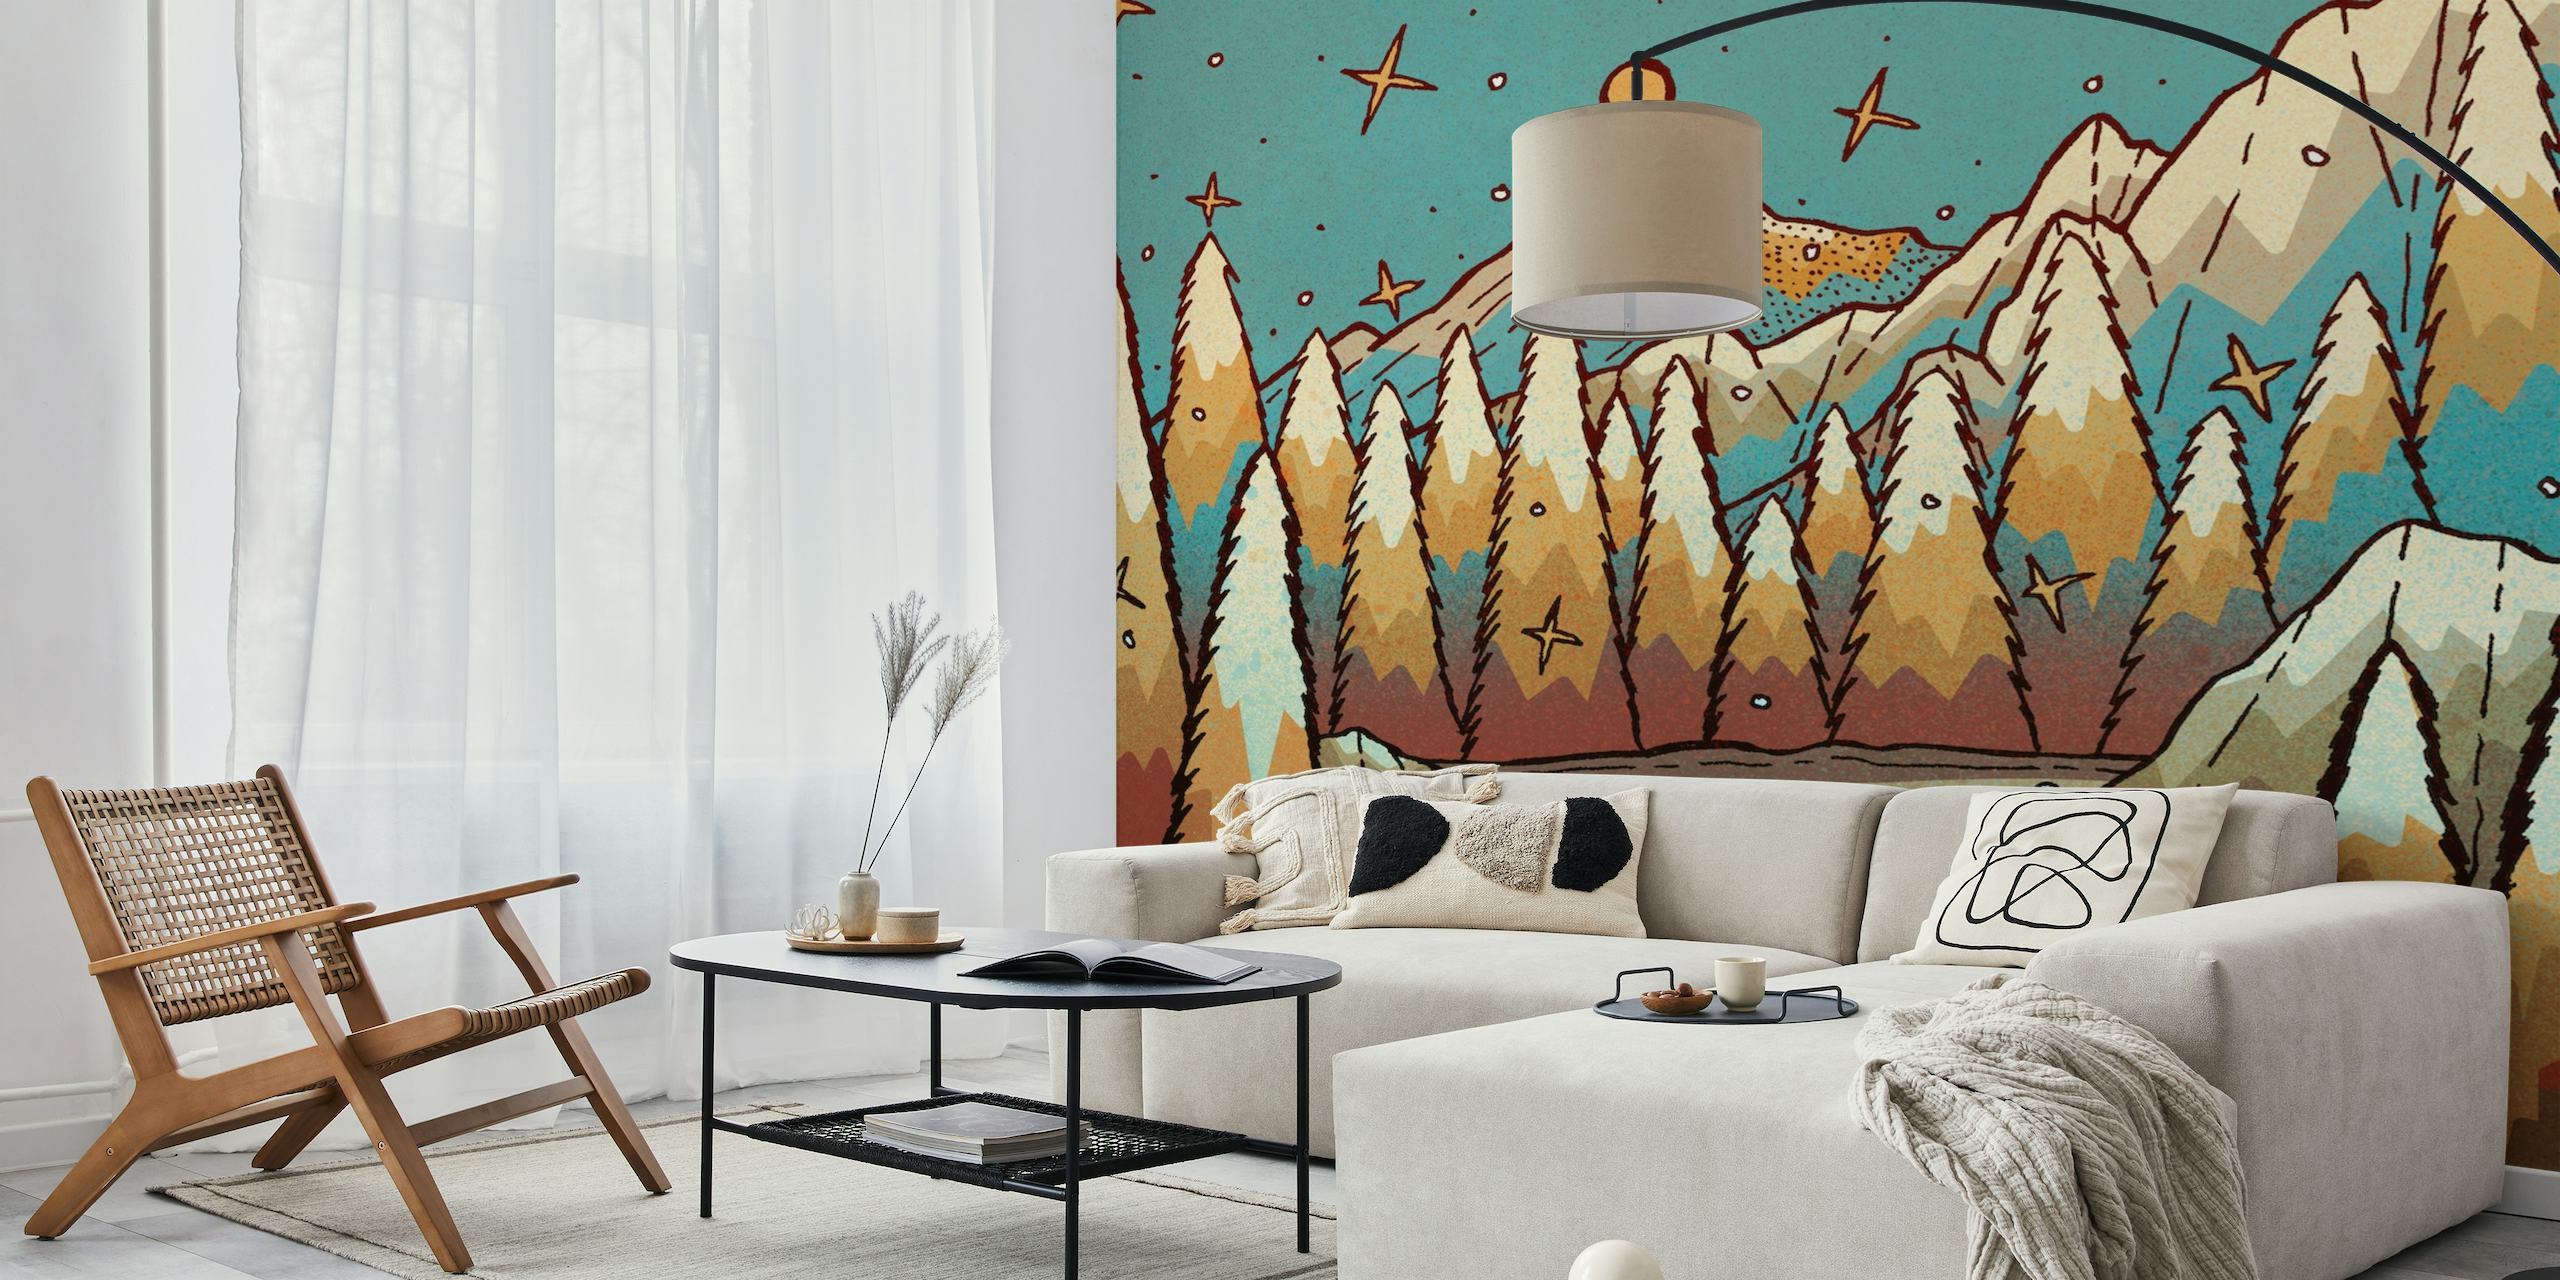 Winter of Gold and Blue wall mural depicting a serene mountainous landscape with amber trees and a starry sky